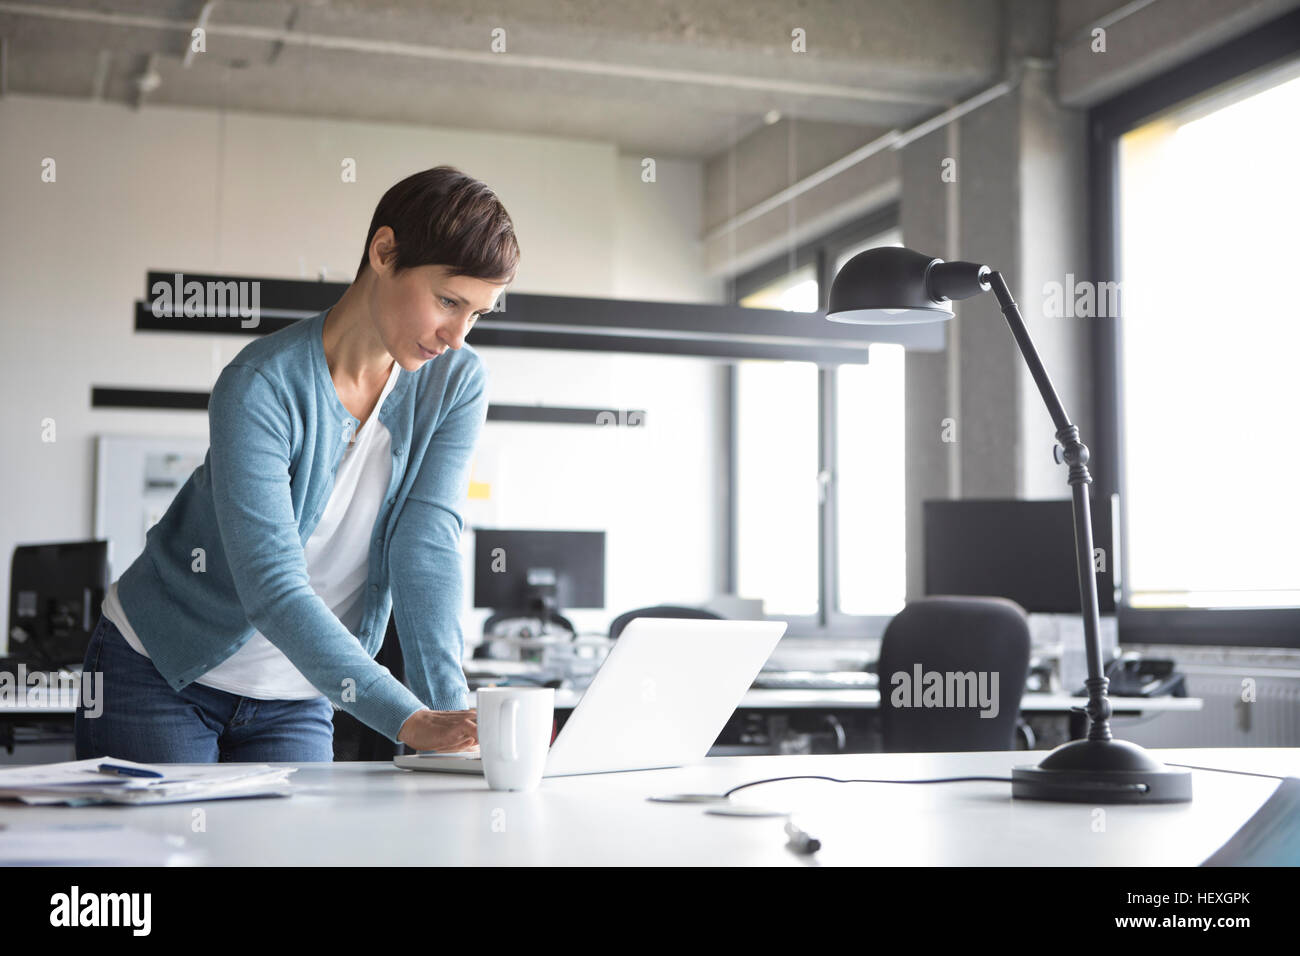 Businesswoman in office using laptop Stock Photo